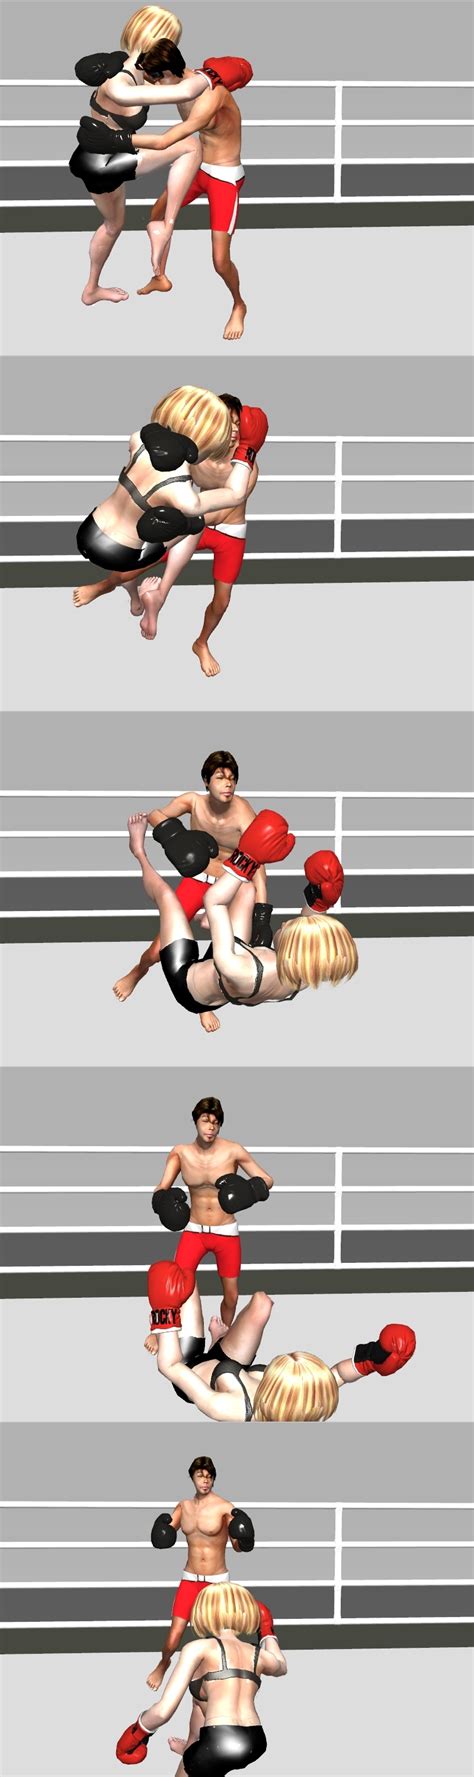 Mixed Kick Boxing Match Page03 By Andypedro On Deviantart